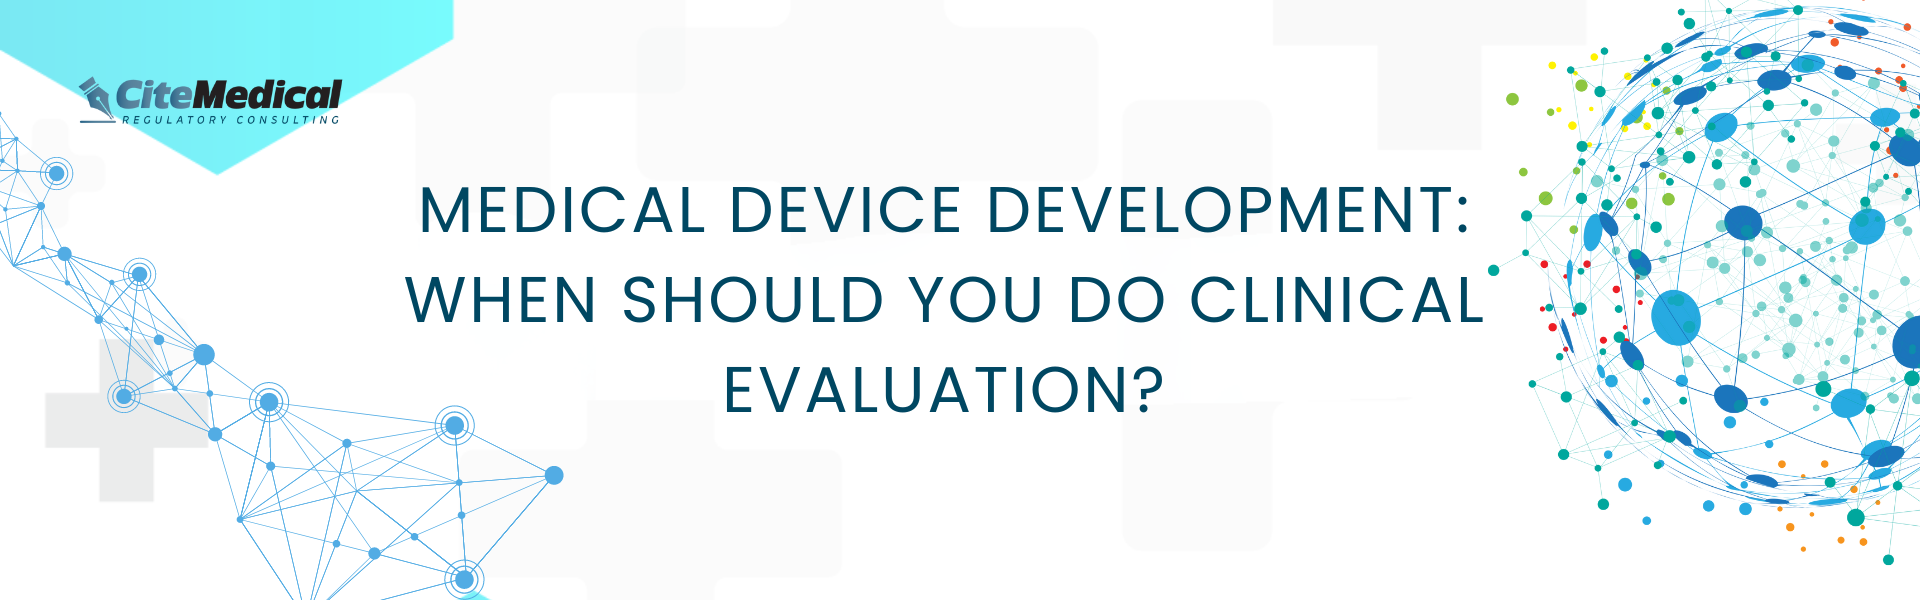 Medical Device Development: When Should you do Clinical Evaluation